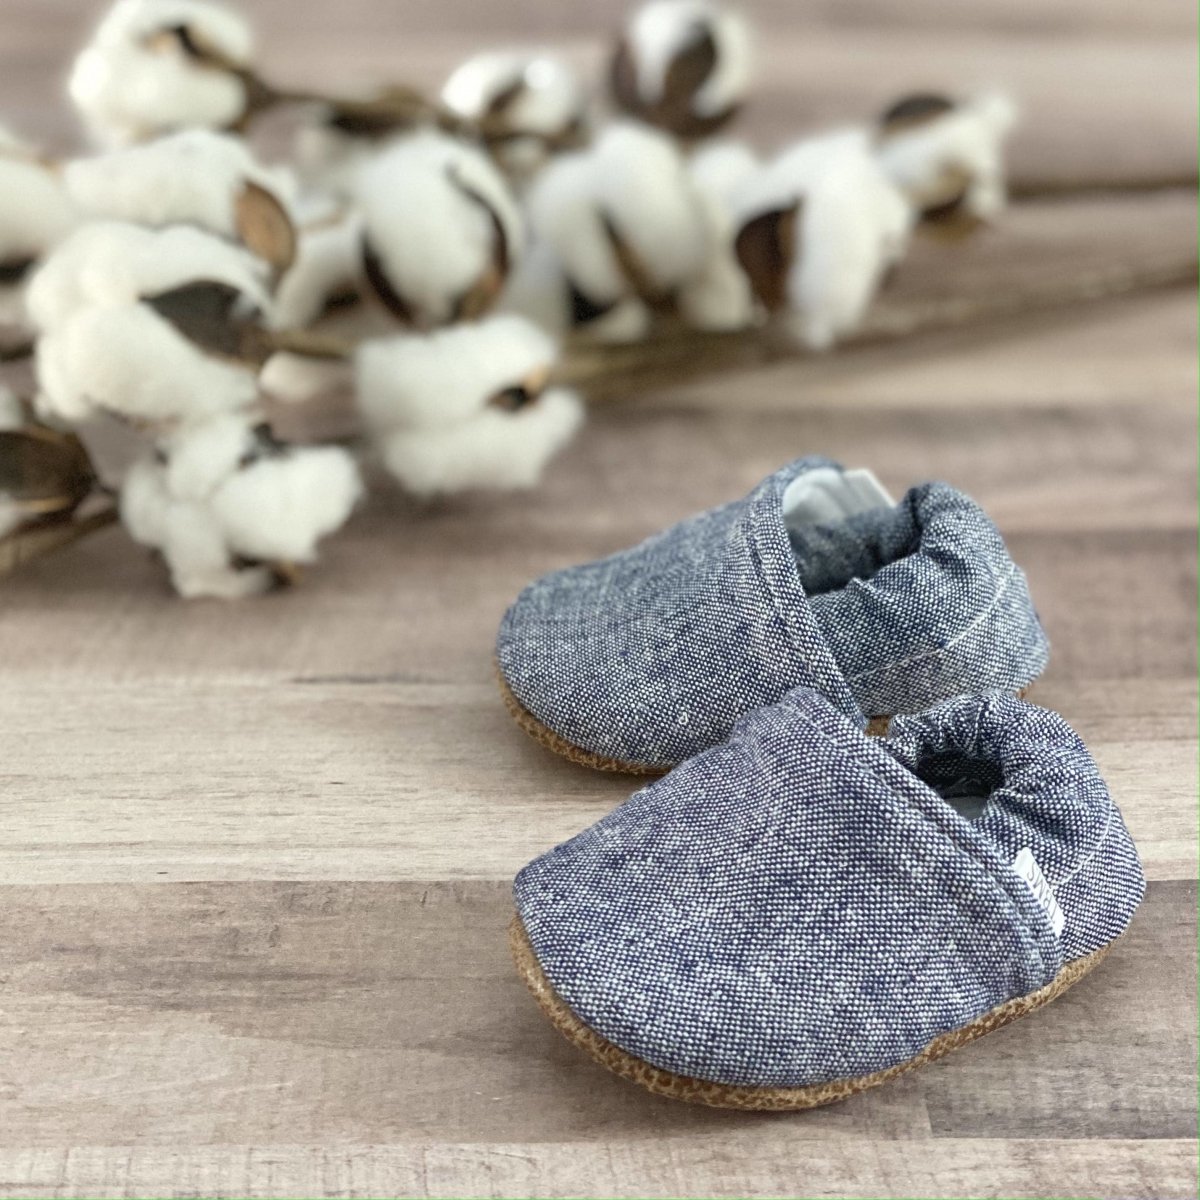 Baby Moccasins - Dusty Blue Textured | Trendy Baby Mocc Shop | Hats, Socks & Shoes - Bee Like Kids